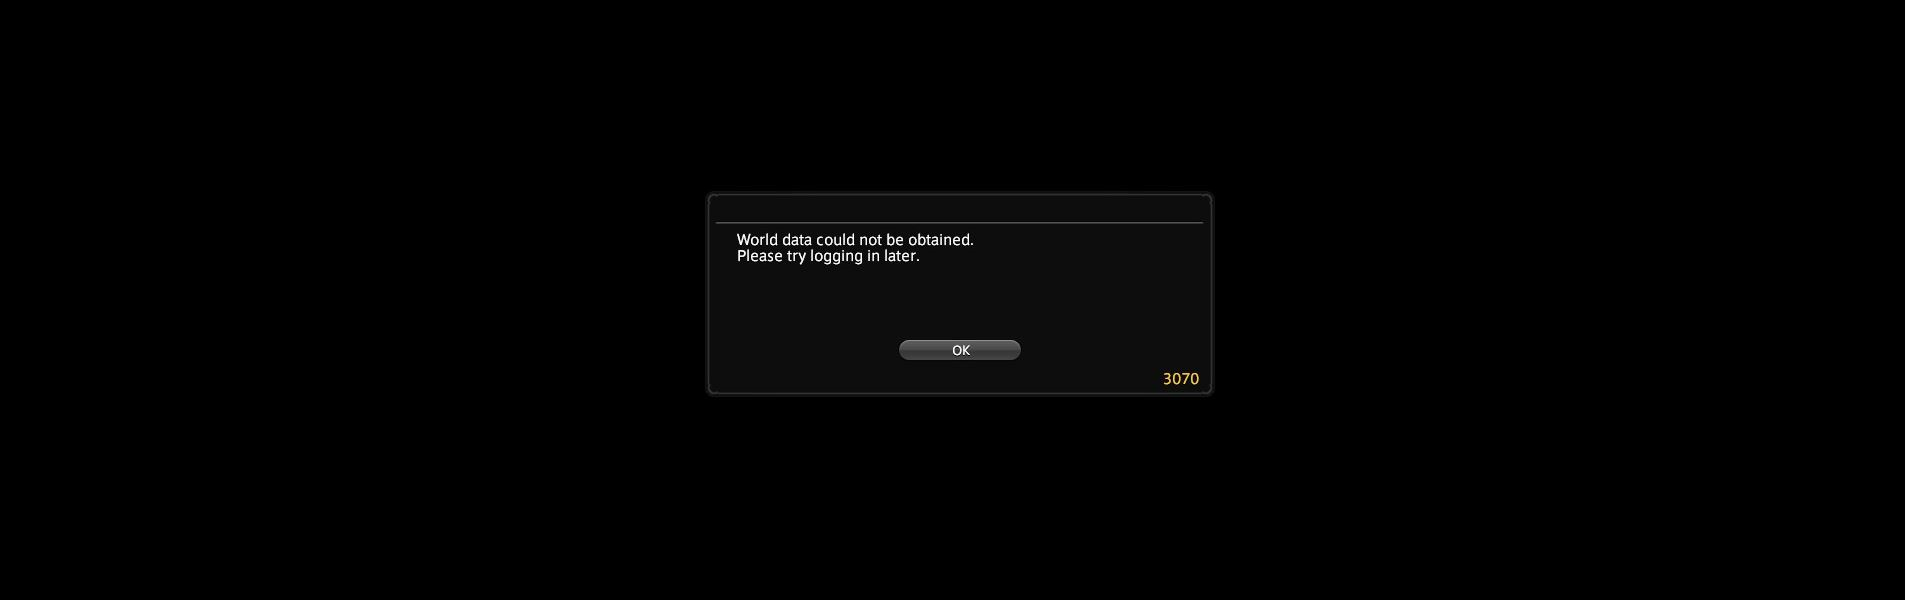 World Data Could Not Be Obtained 3070 Error on FFXIV: How to Fix